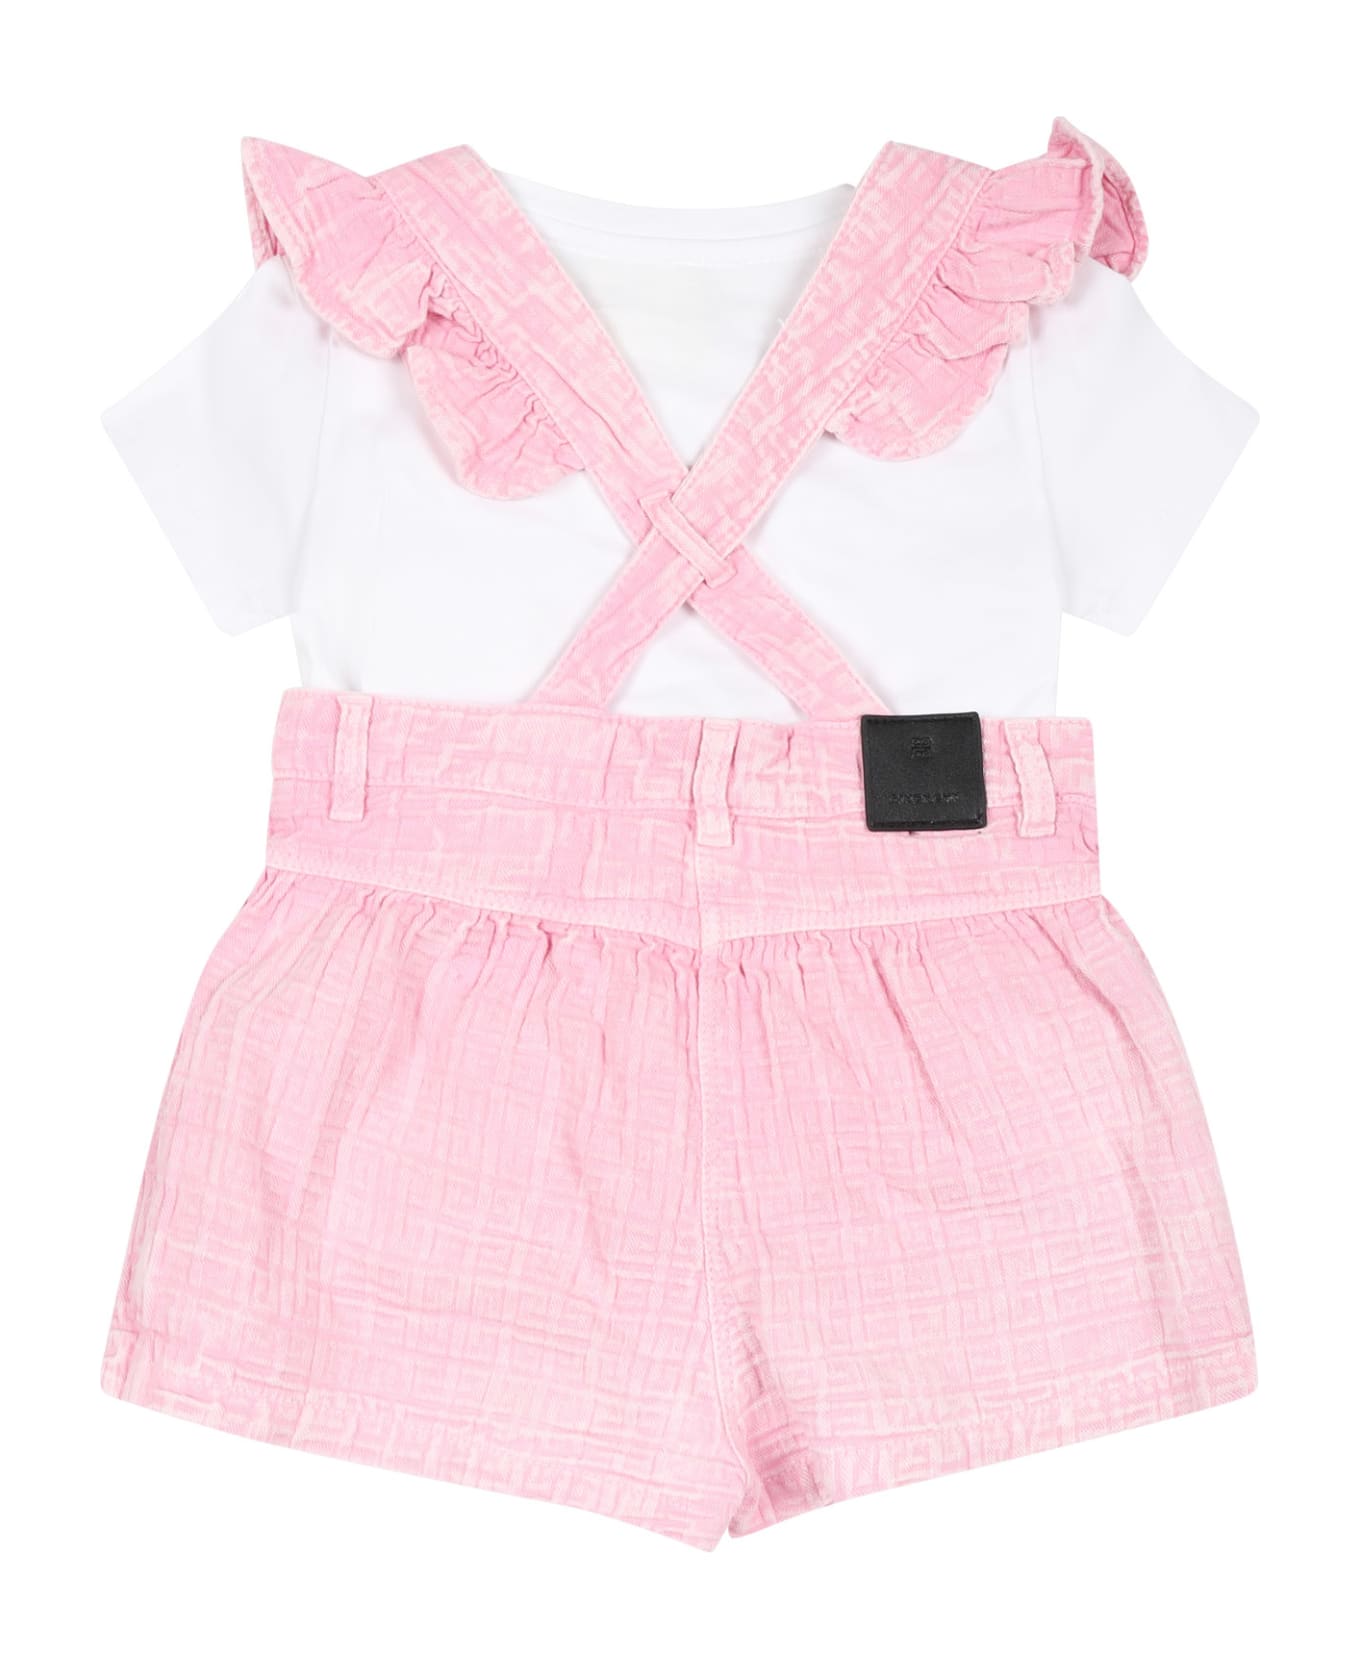 Givenchy Pink Suit For Baby Girl With Logo - Pink ウェア